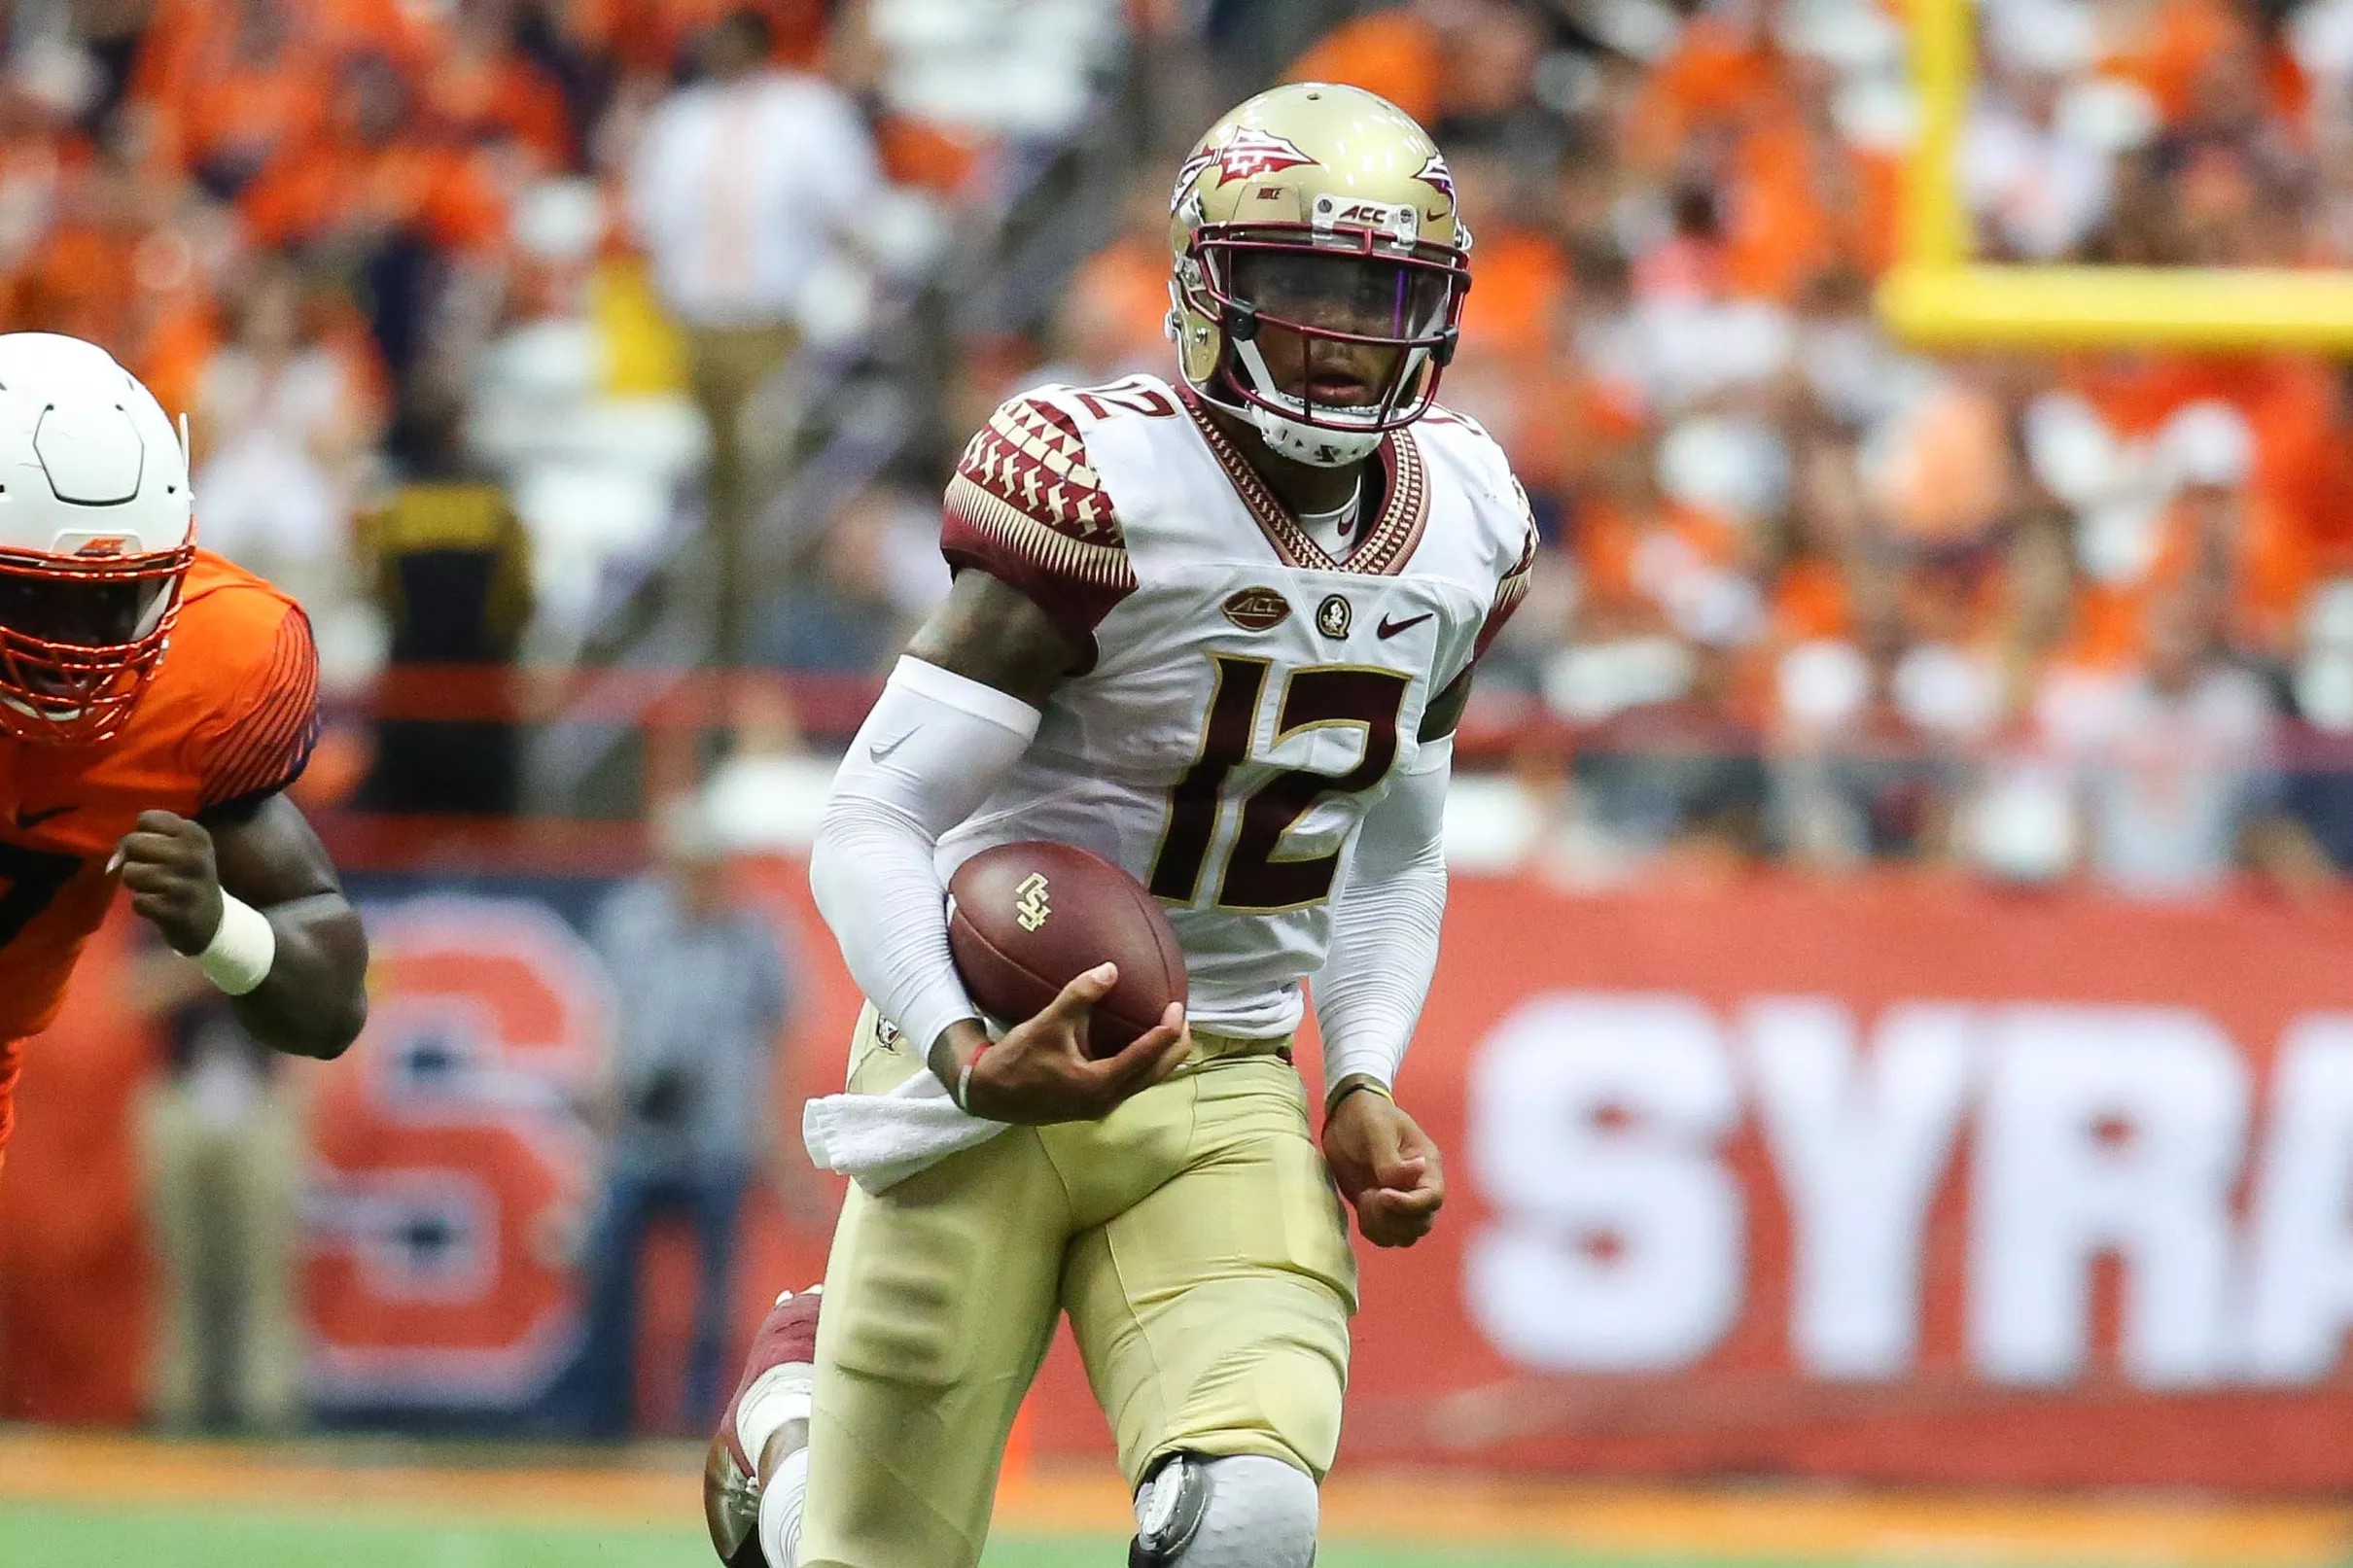 Florida State football, recruiting news: FSU is a double digit favorite